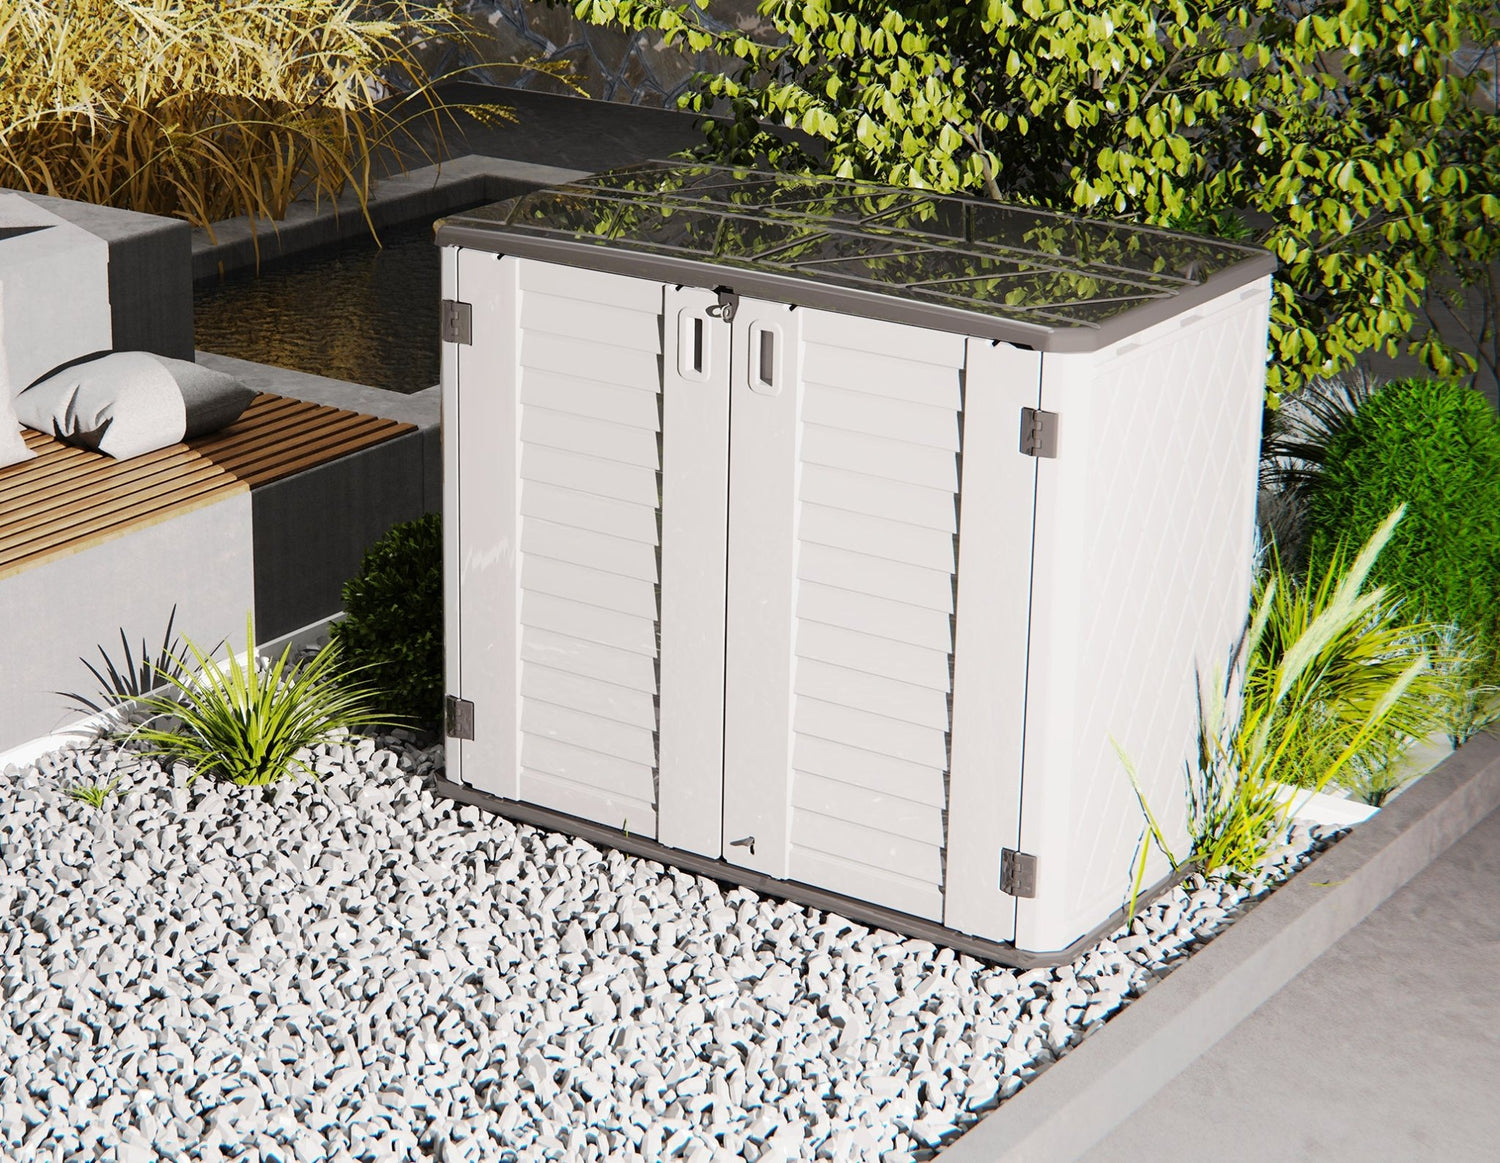 Horti Cubic 34 cu. ft. Outdoor Horizontal Storage Shed - Horti Cubic